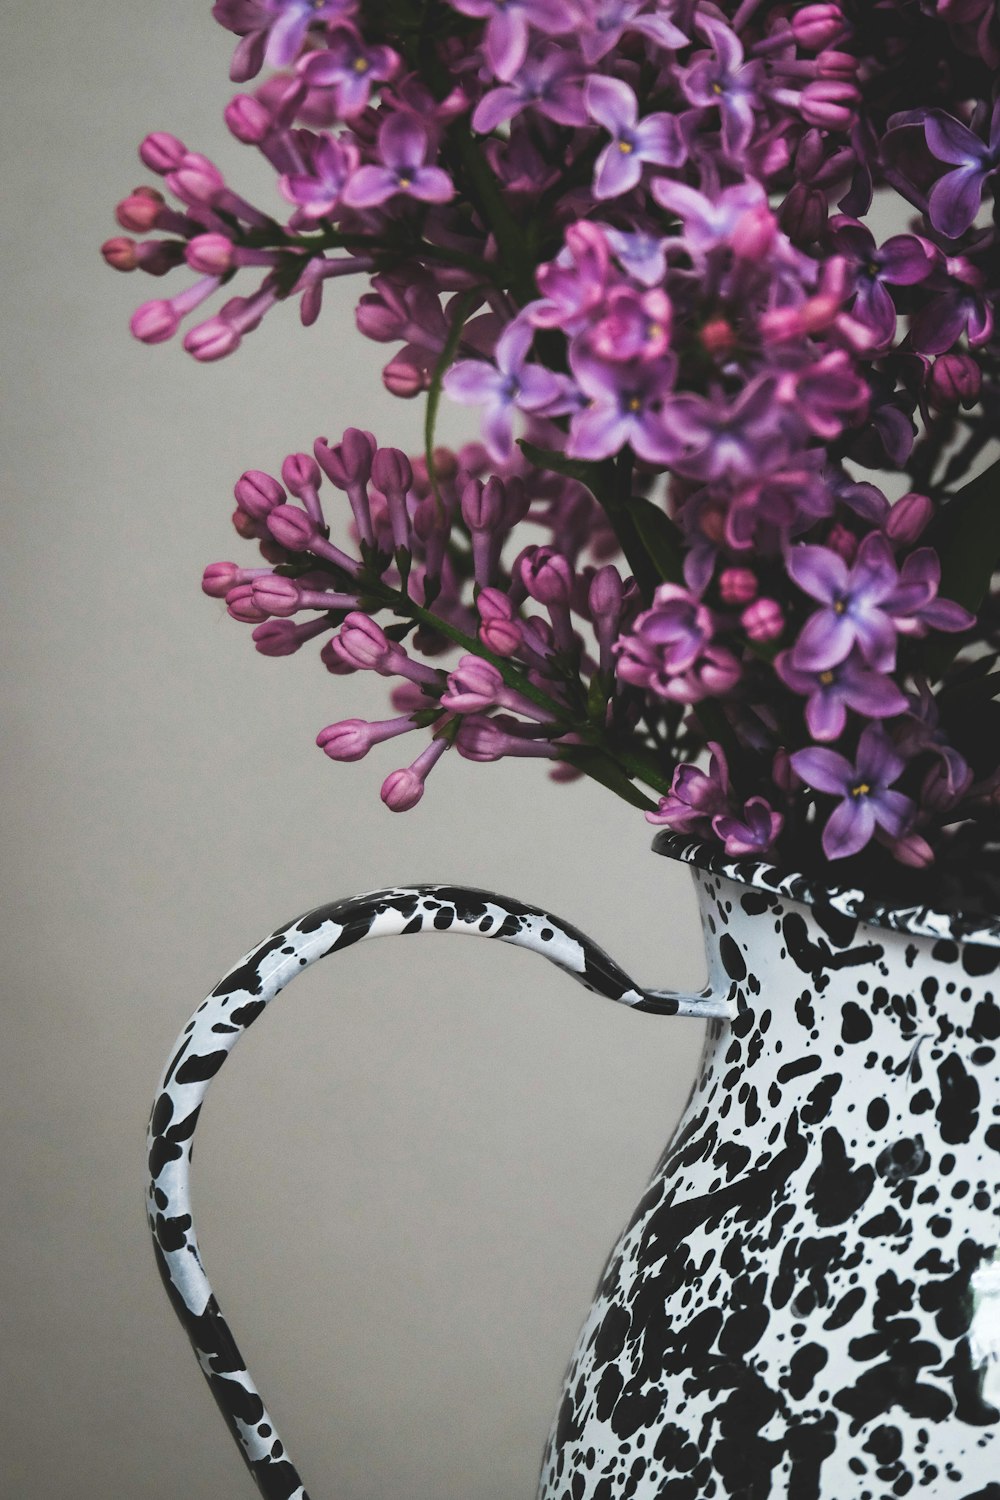 purple and white flowers in white and black ceramic vase